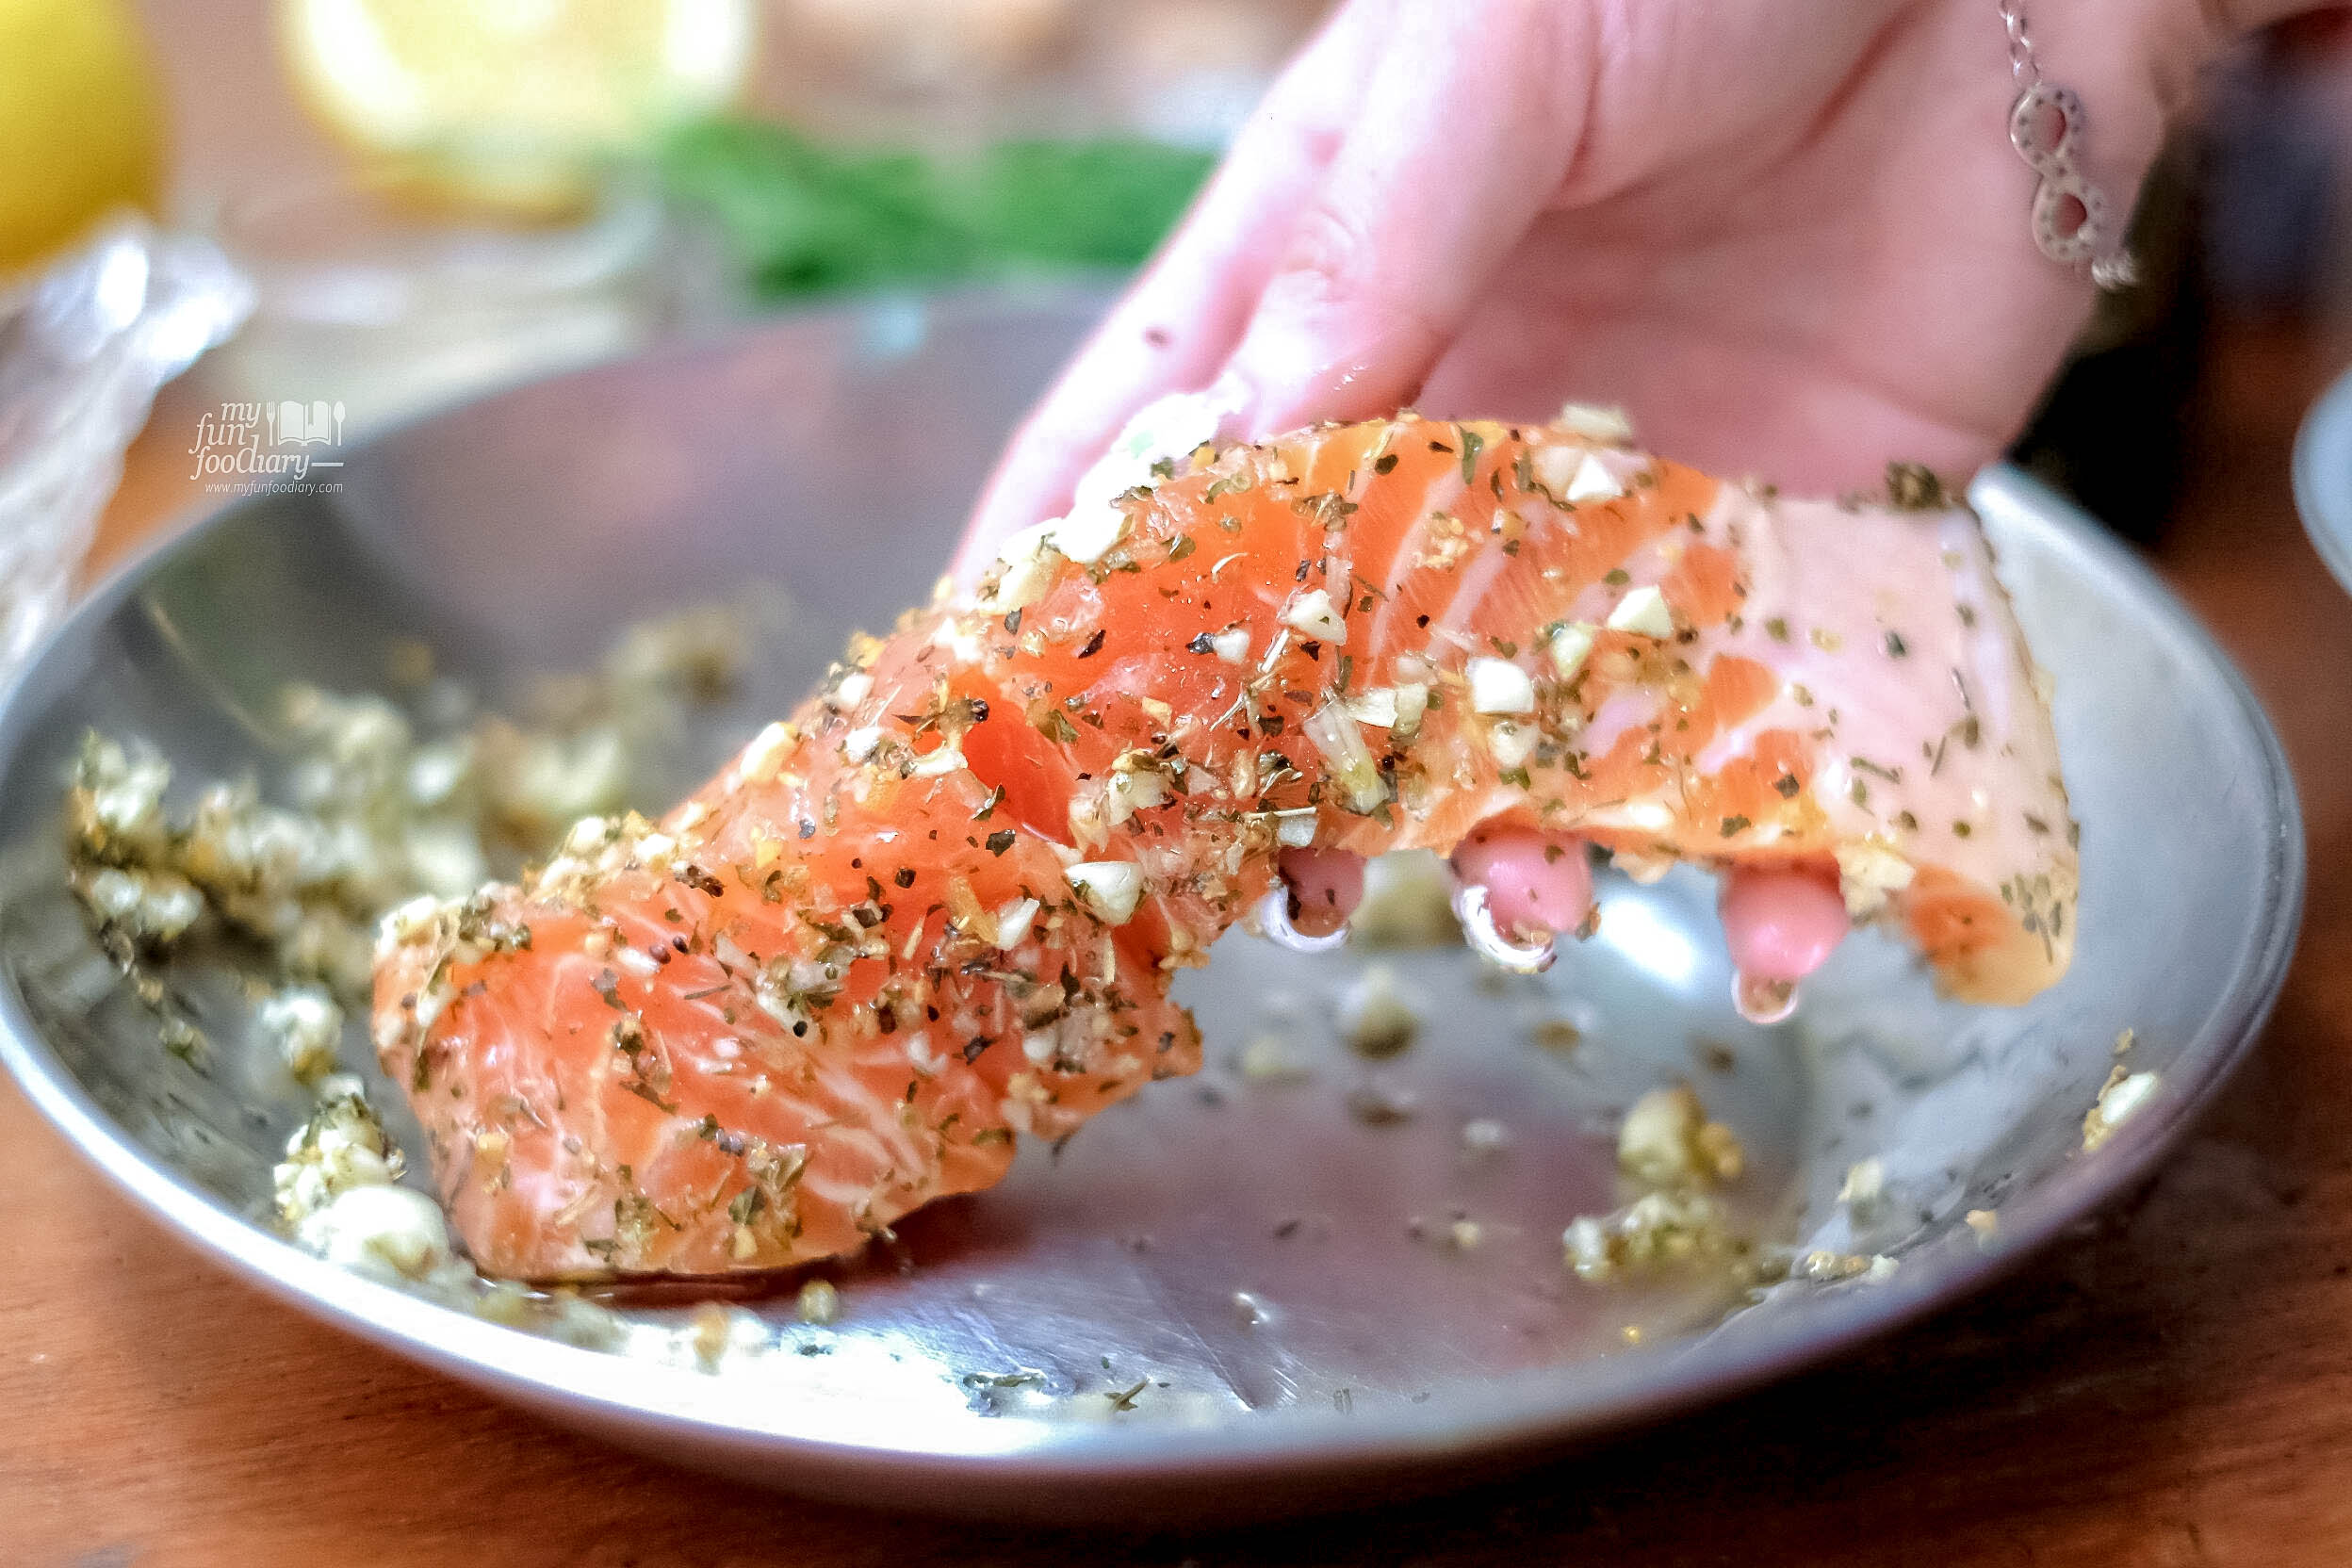 Coating the premium Salmon Fillet by Myfunfoodiary